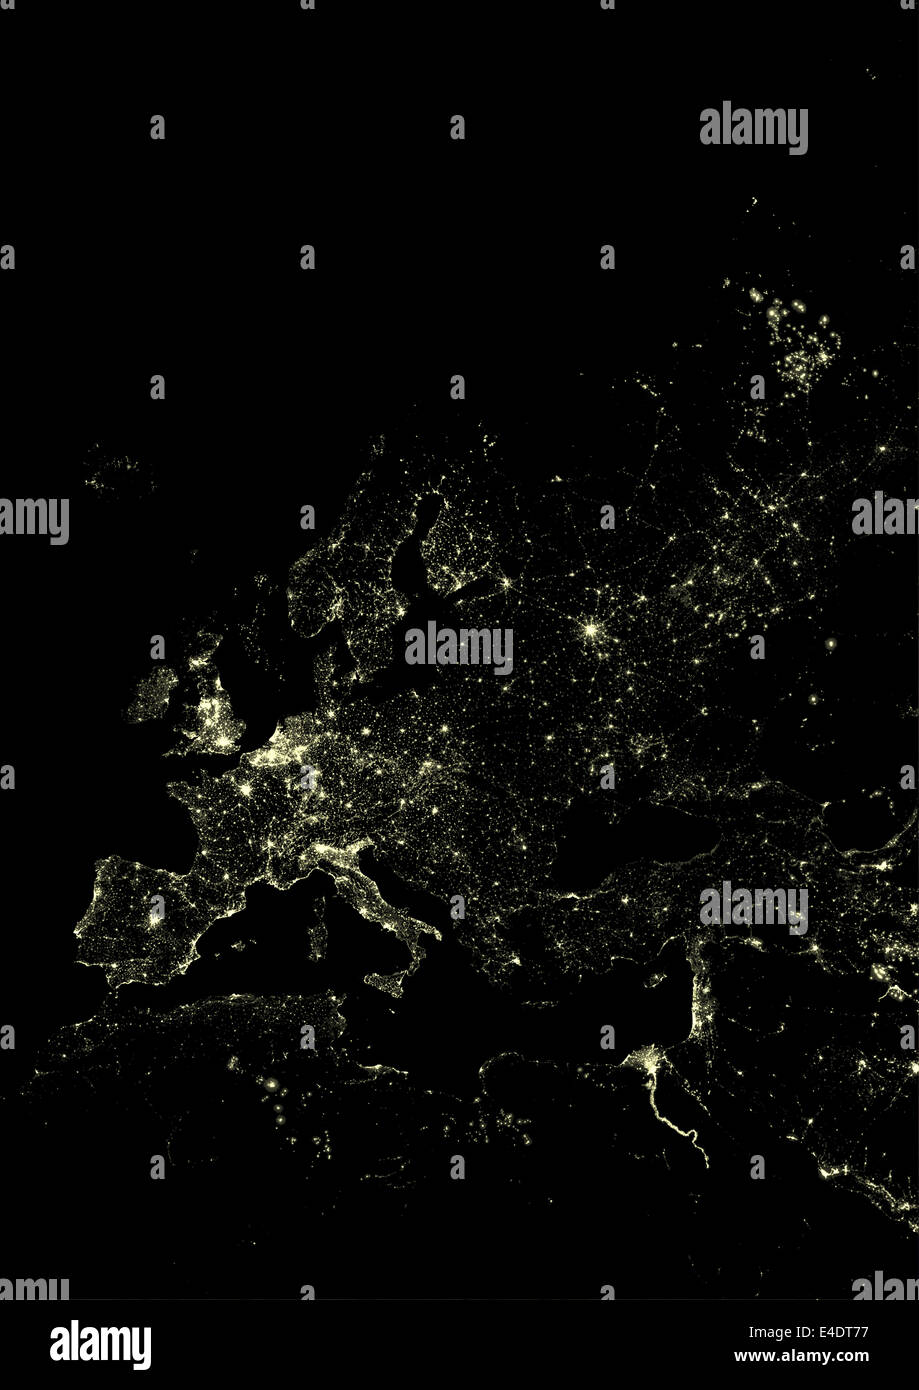 Western Europe At Night, Satellite Image. Lights of Western Europe at night from space. Coloured image derived from satellite da Stock Photo